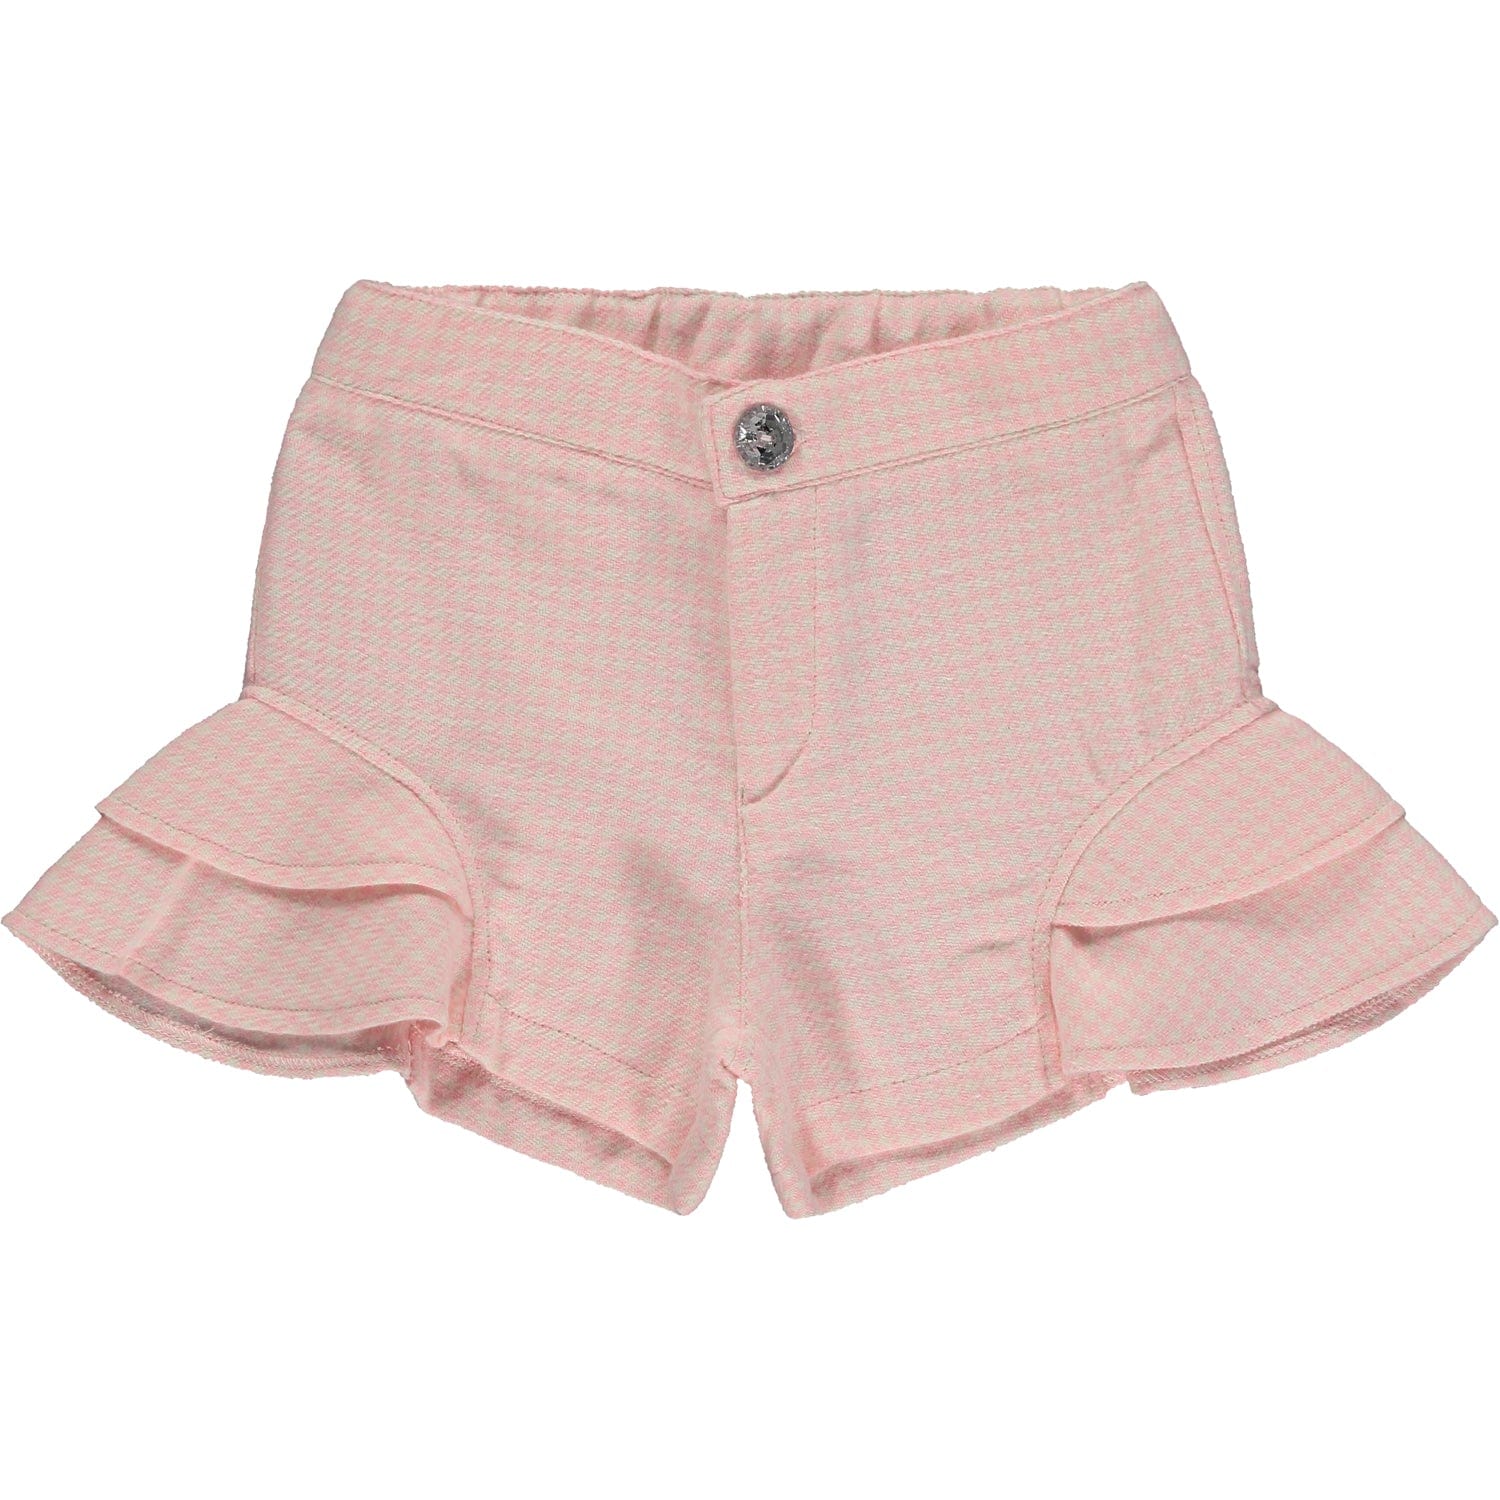 A DEE - Peony Dreams Angel Houndstooth Short Set - Pink